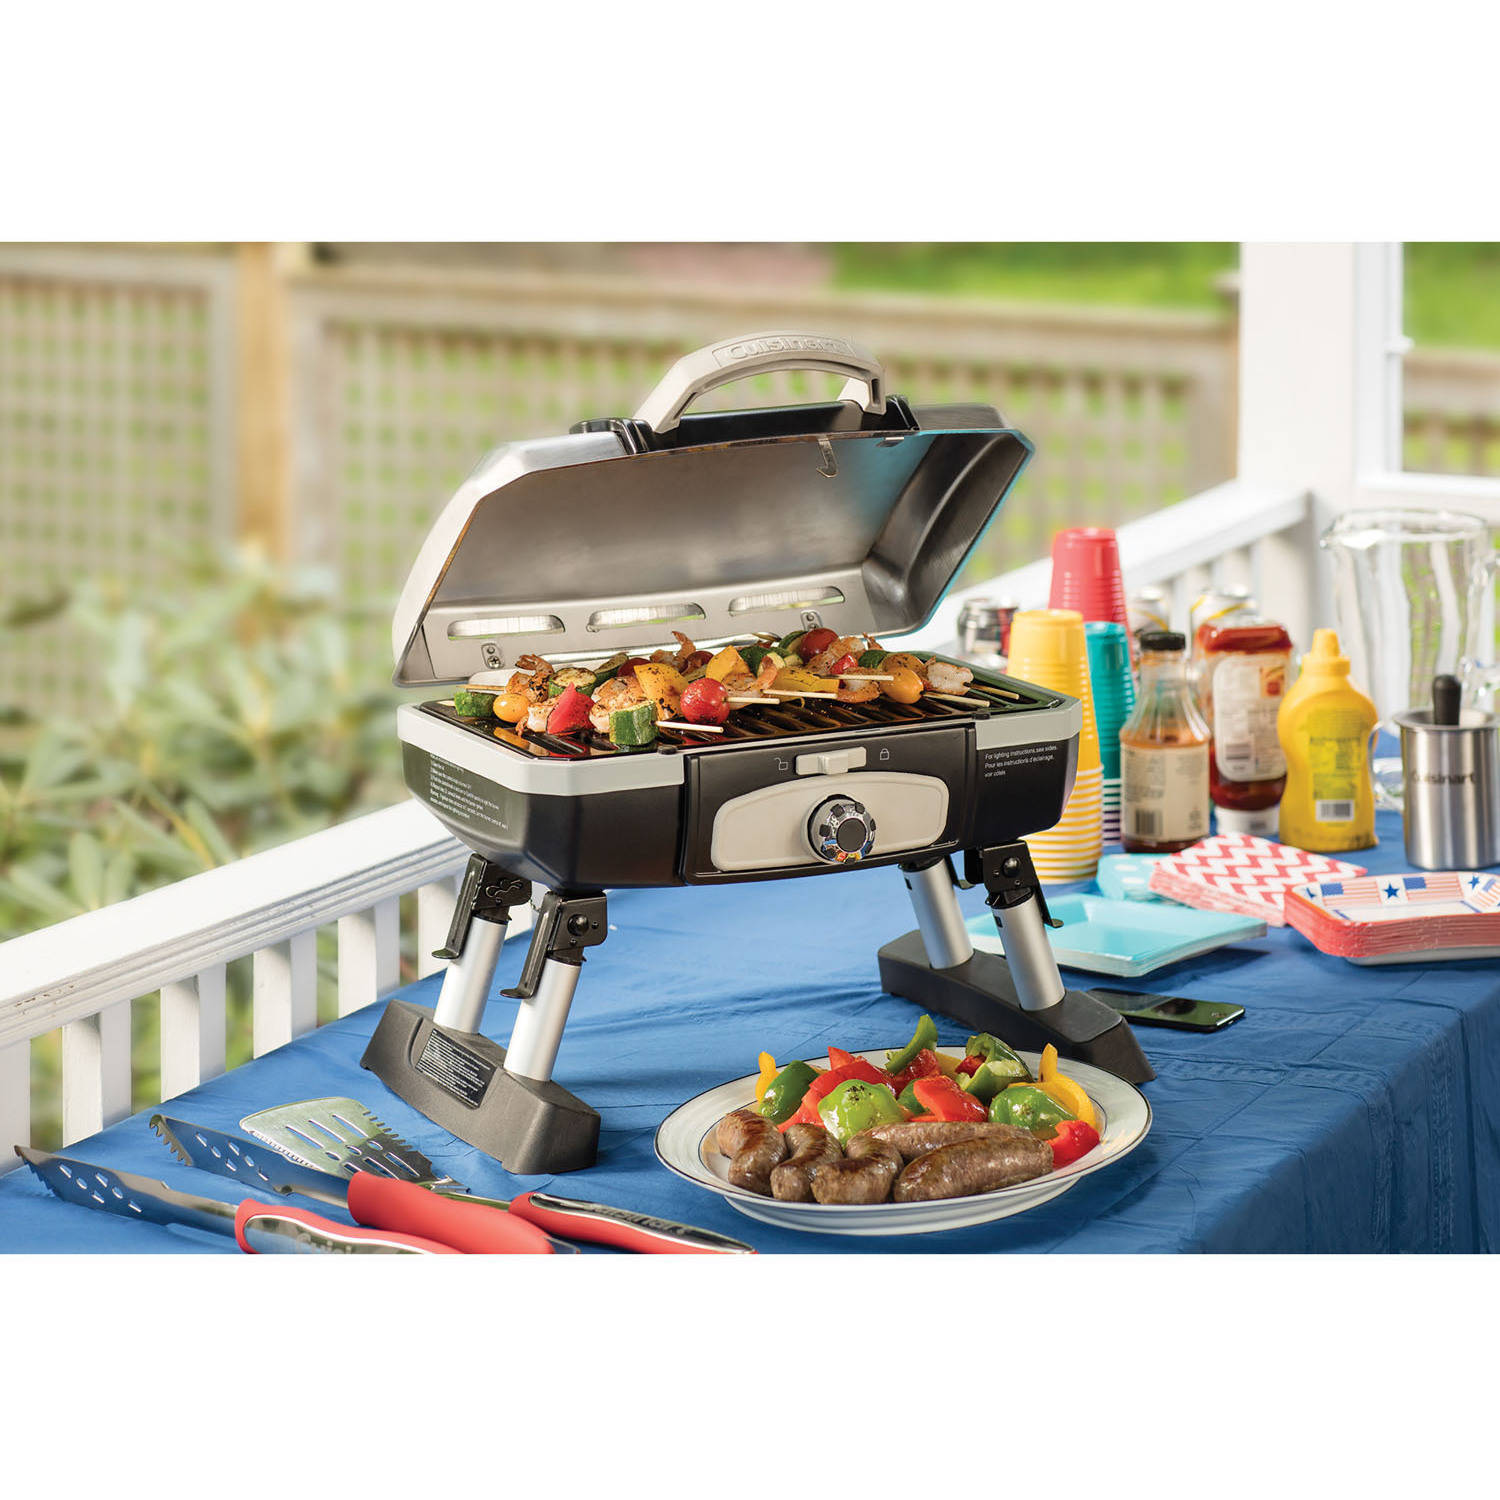 Cuisinart Petit Gourmet Portable Tabletop Outdoor LP Gas Grill, Silver/Black - image 3 of 3